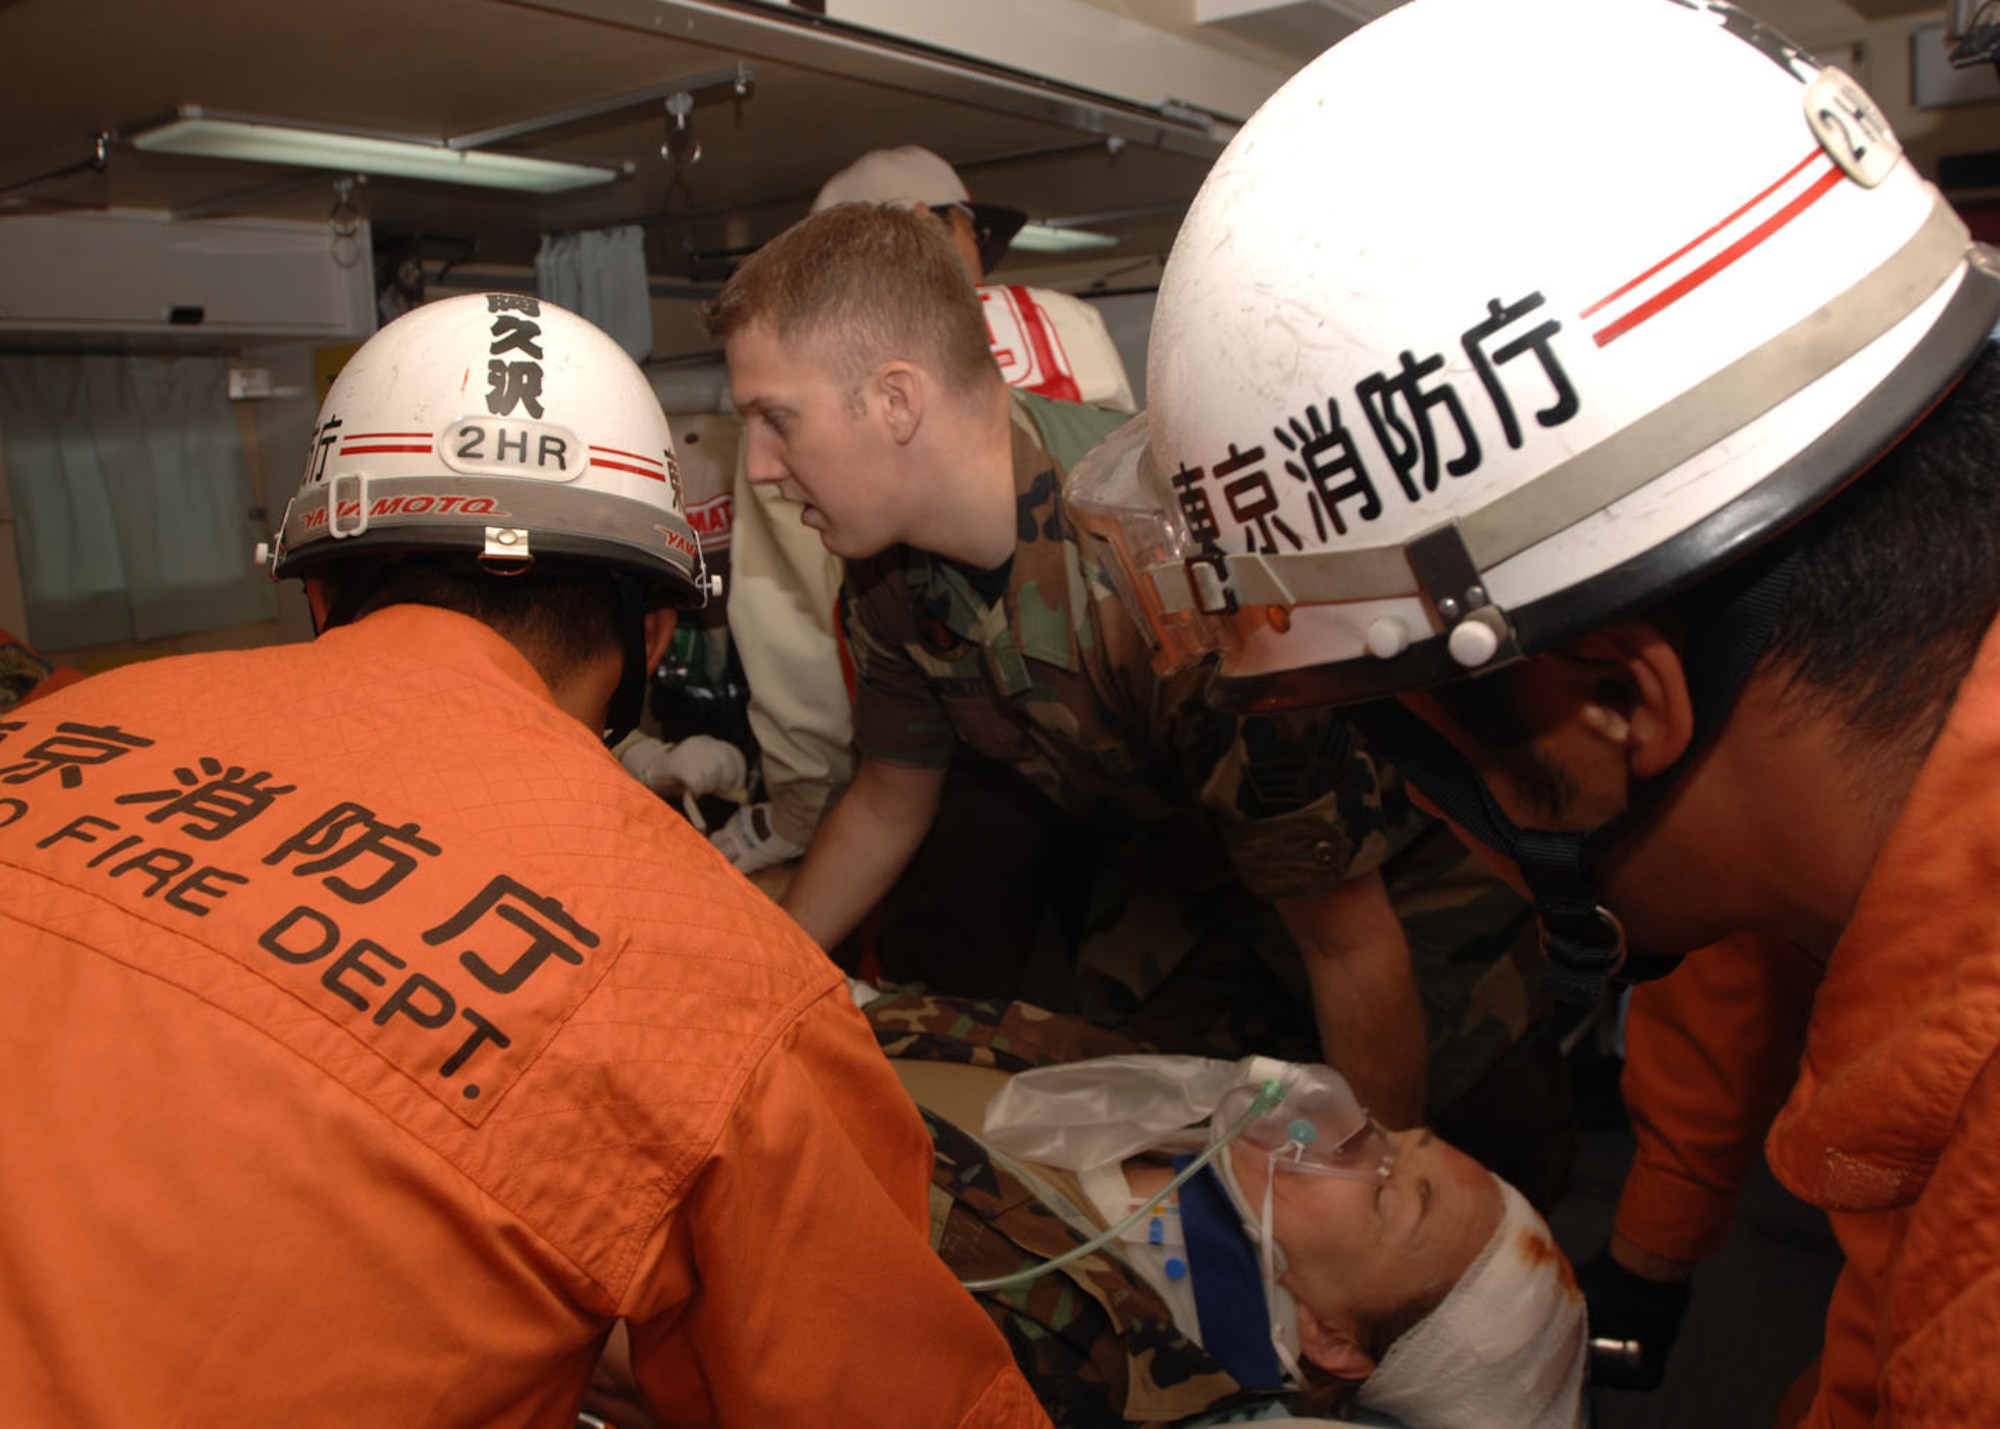 070901 YOKOTA AIR BASE, Japan -- Personnel from the 374th Airlift Wing and the Tokyo Metropolitan Fire Department work together to provide emergency care to simulated patients for a Joint Disaster Management Exercise held by the Tokyo Metropolitan Government on the Yokota Air Base flightline. In Japan, 1 September is established for Disaster Awareness (Readiness) Day  as known as Bo-sai-no-hi after the Great Kanto Earthquake in 1923 this exercise helps prepare the Japanese citizens for future disasters. Yokota has participated in the TMG exercise since 2001.
(U.S. Air Force photo by A1C Laszlo Babocsi)
